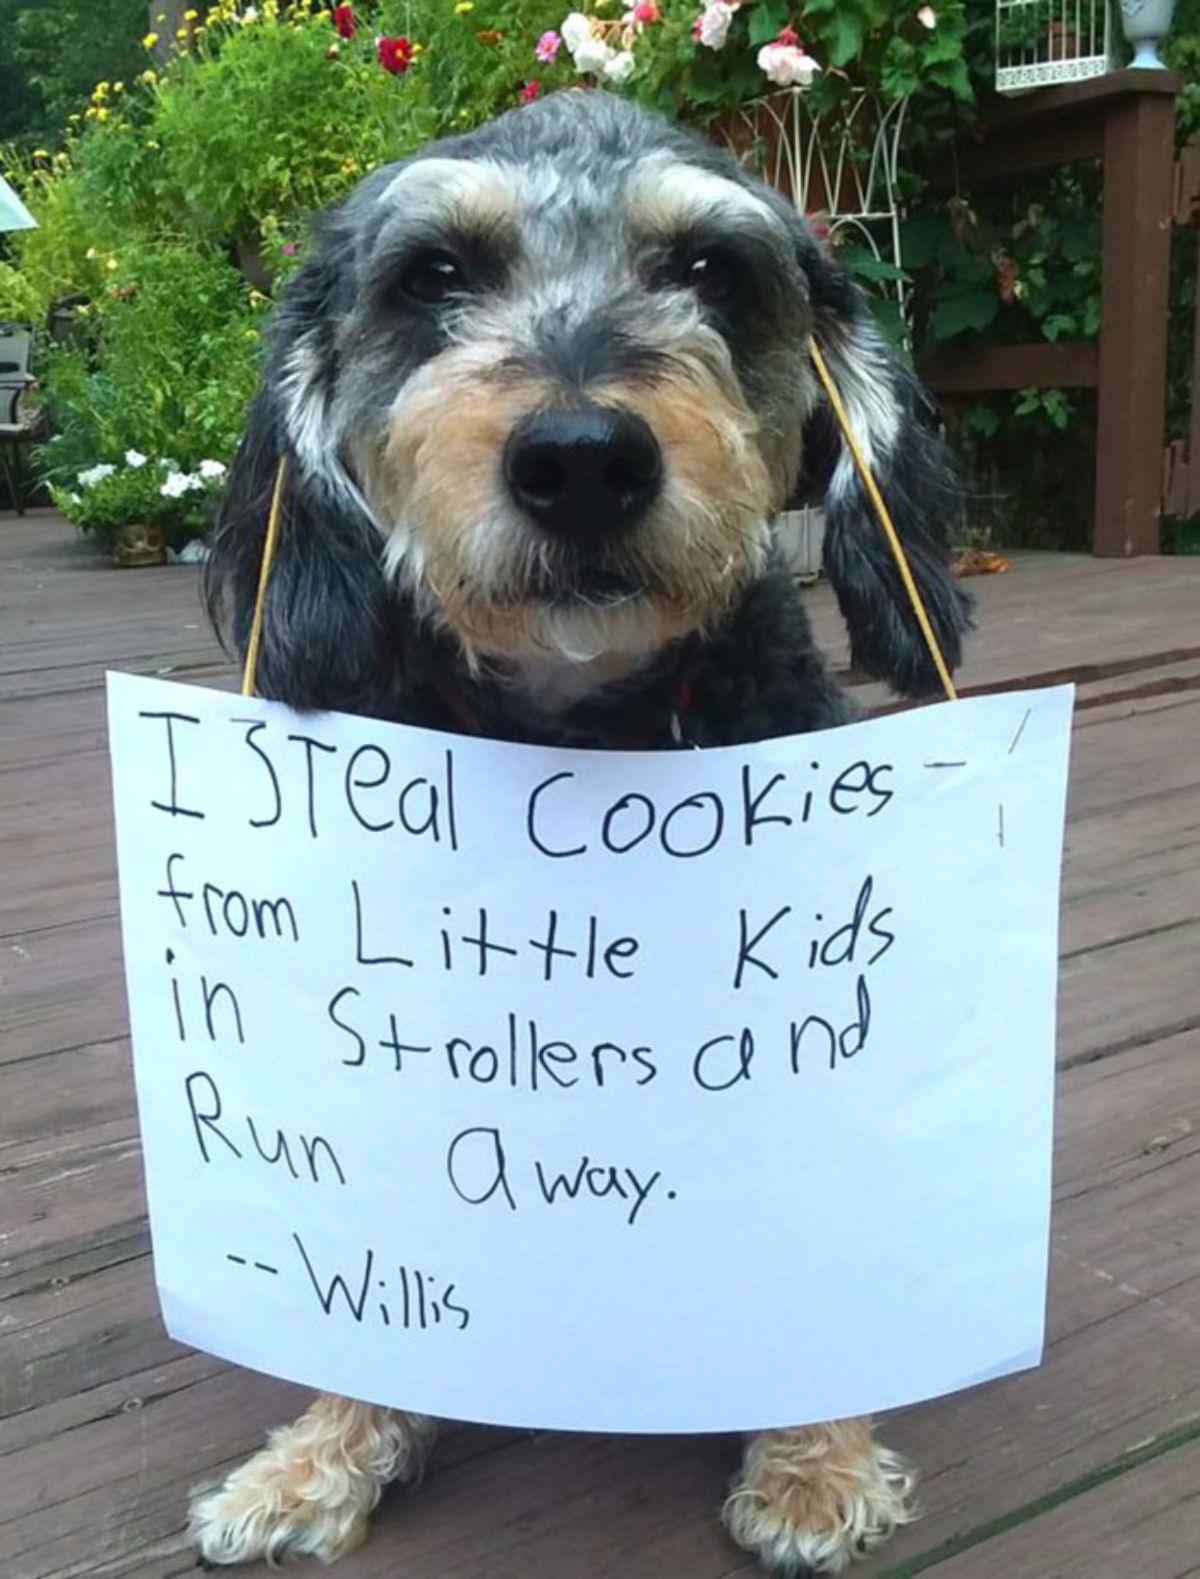 fluffy black brown and white dog sitting on wooden patio with a note saying "I steal cookies from little kids in strollers and run away - Willis"